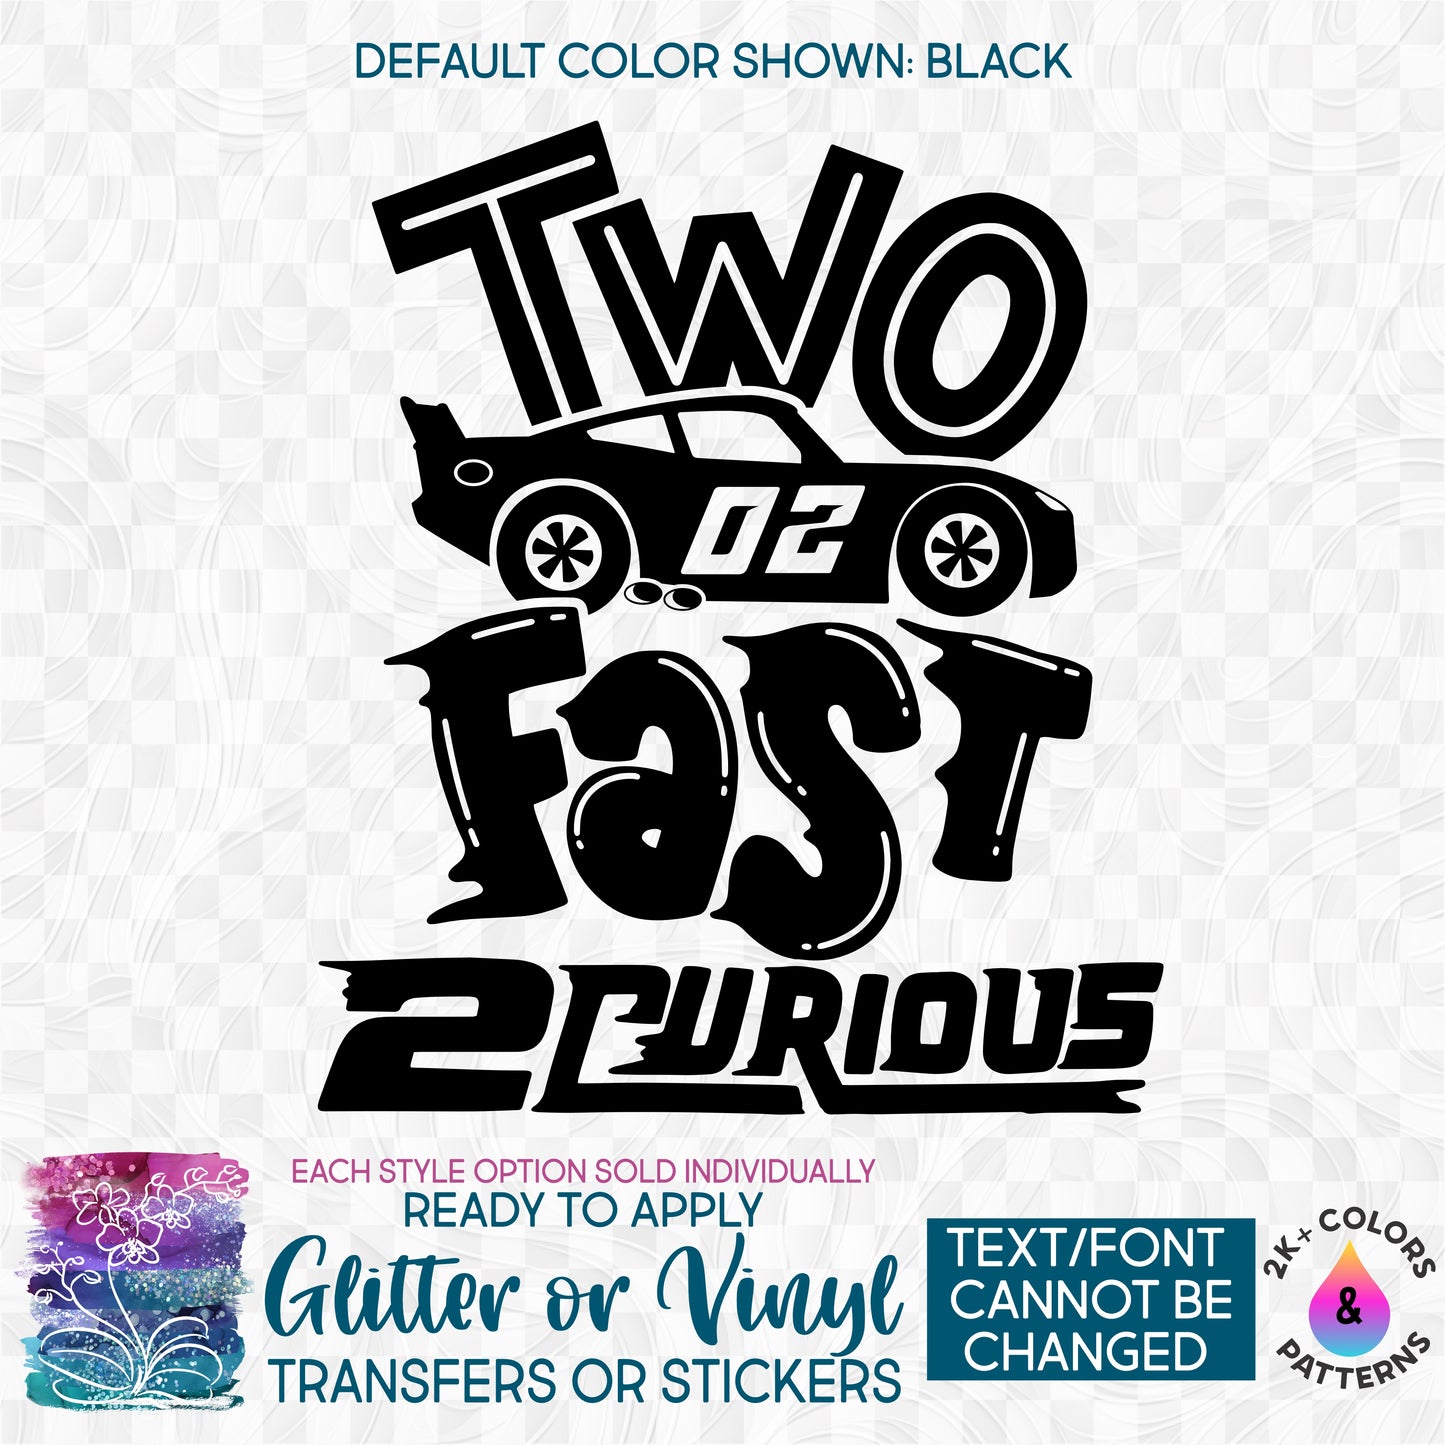 (s165-Y2) Two Fast Two Curious Race Car Glitter or Vinyl Iron-On Transfer or Sticker